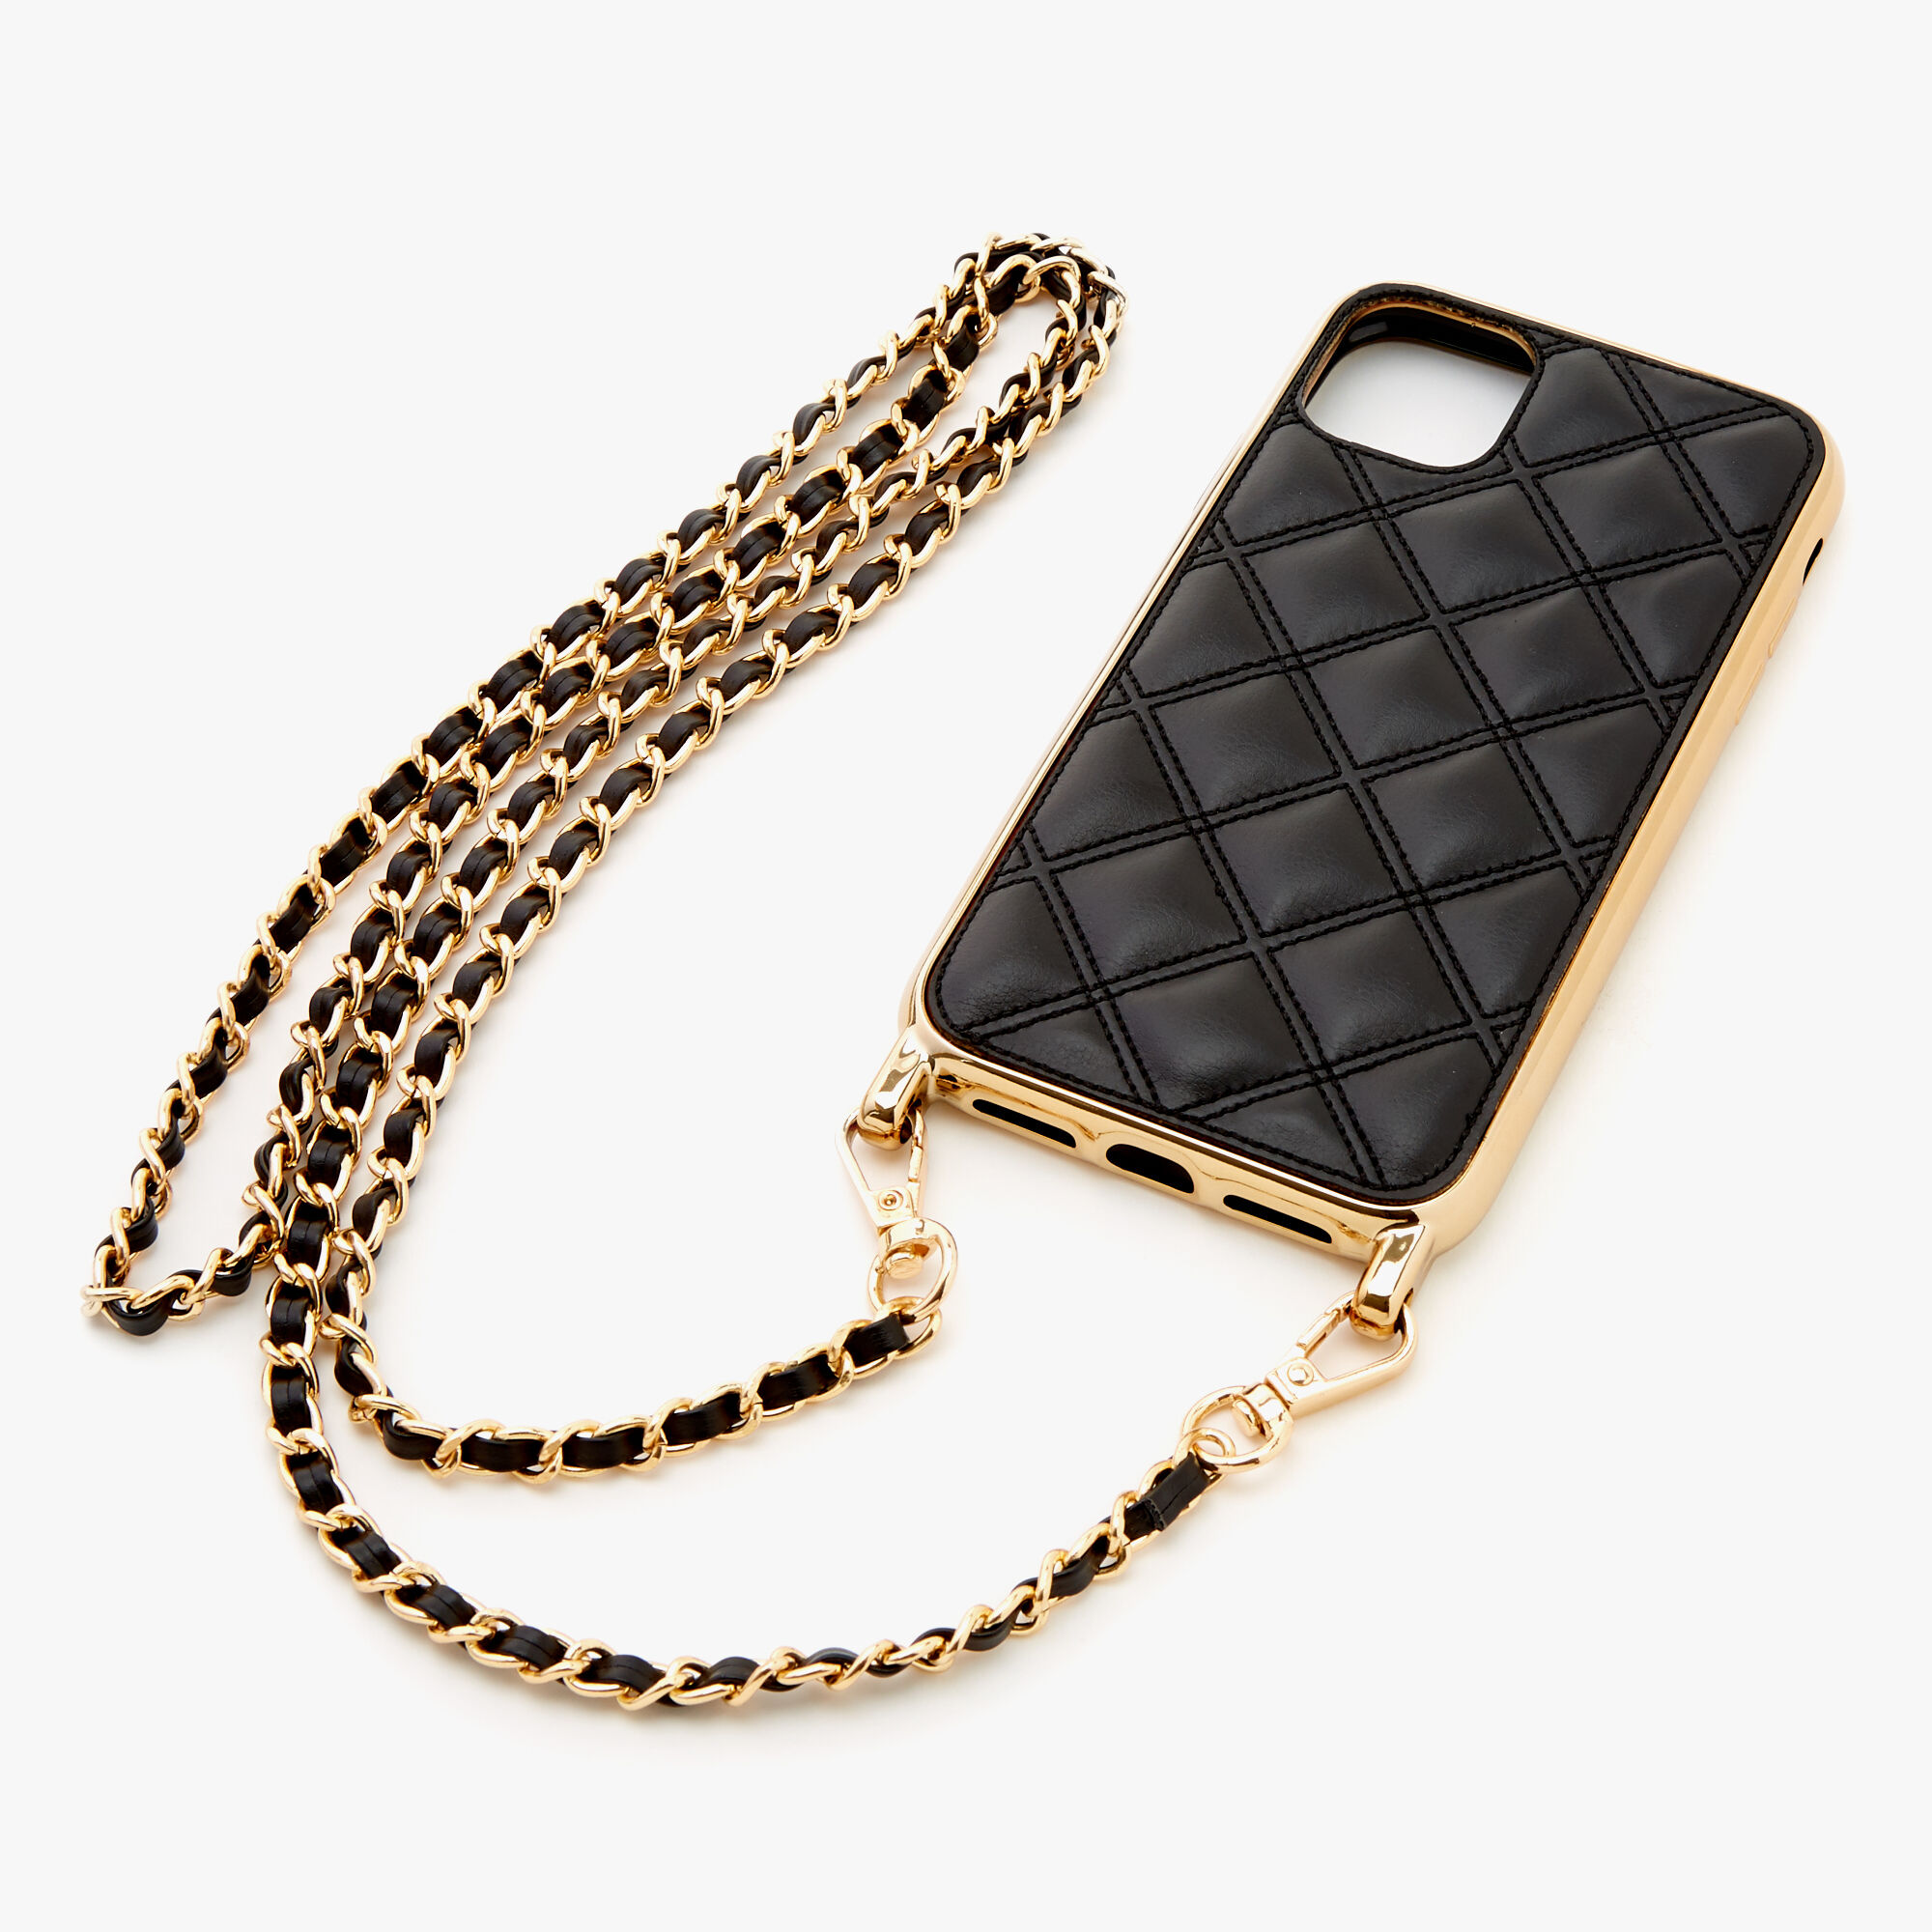 Black Quilted Phone Case with Gold Chain - Fits iPhone 11